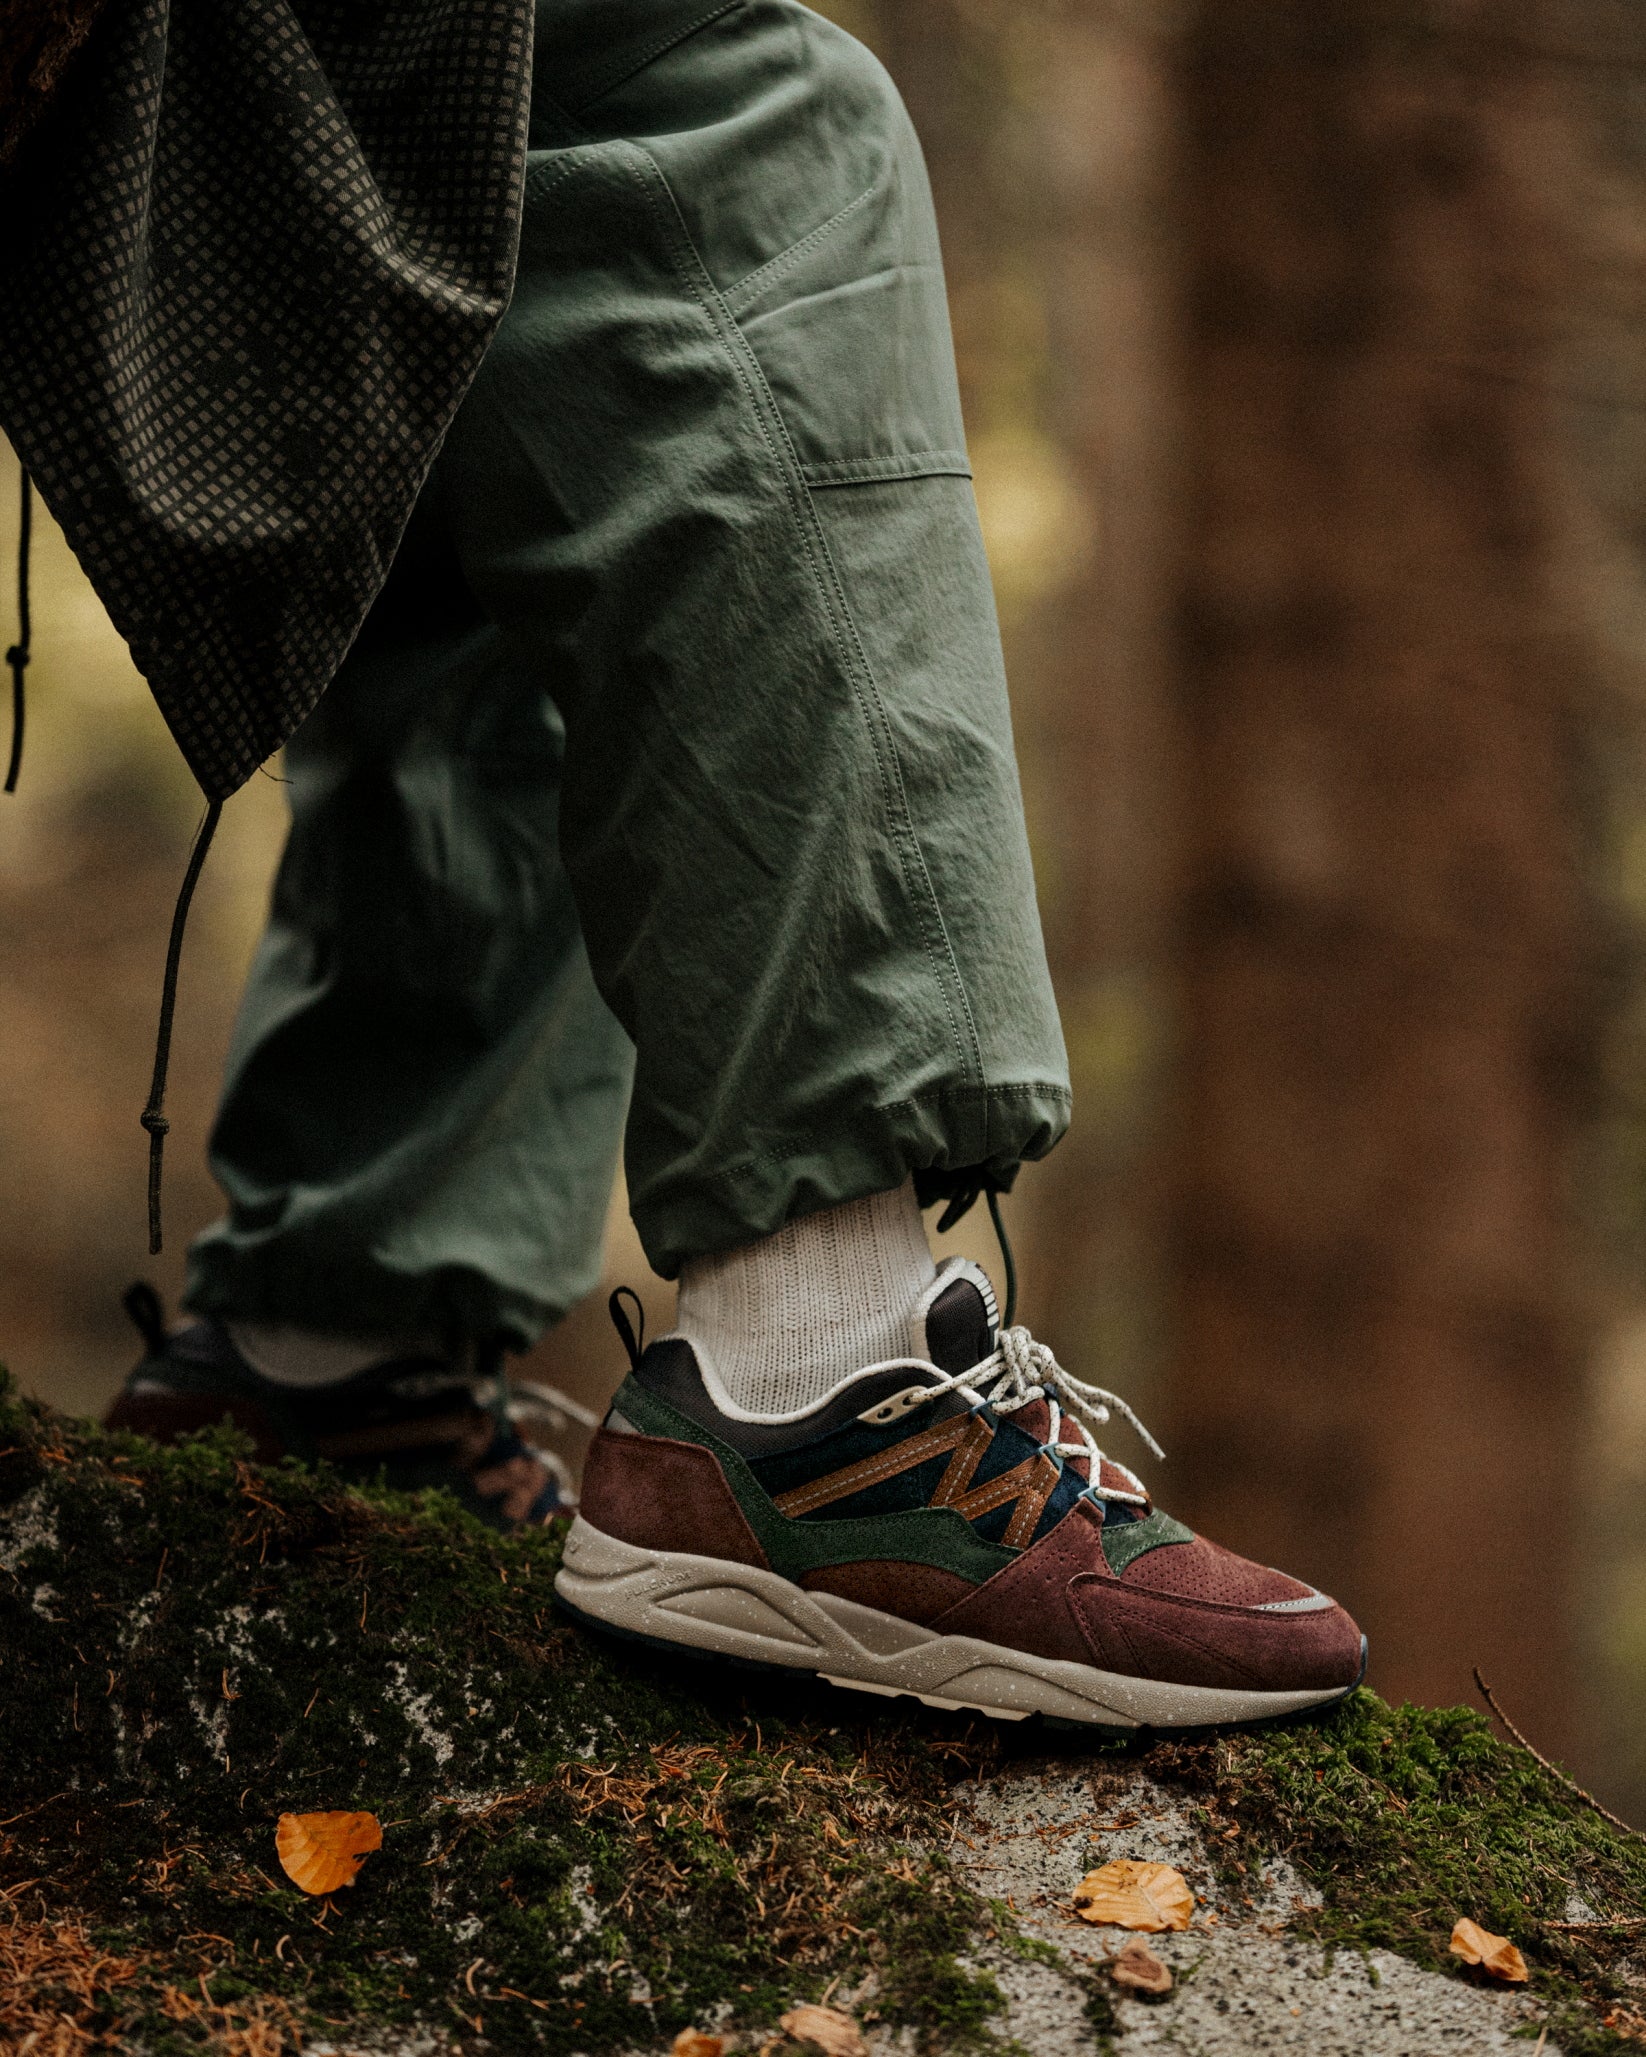 Karhu Fusion 2.0 "Thyme" outdoor pack F804114